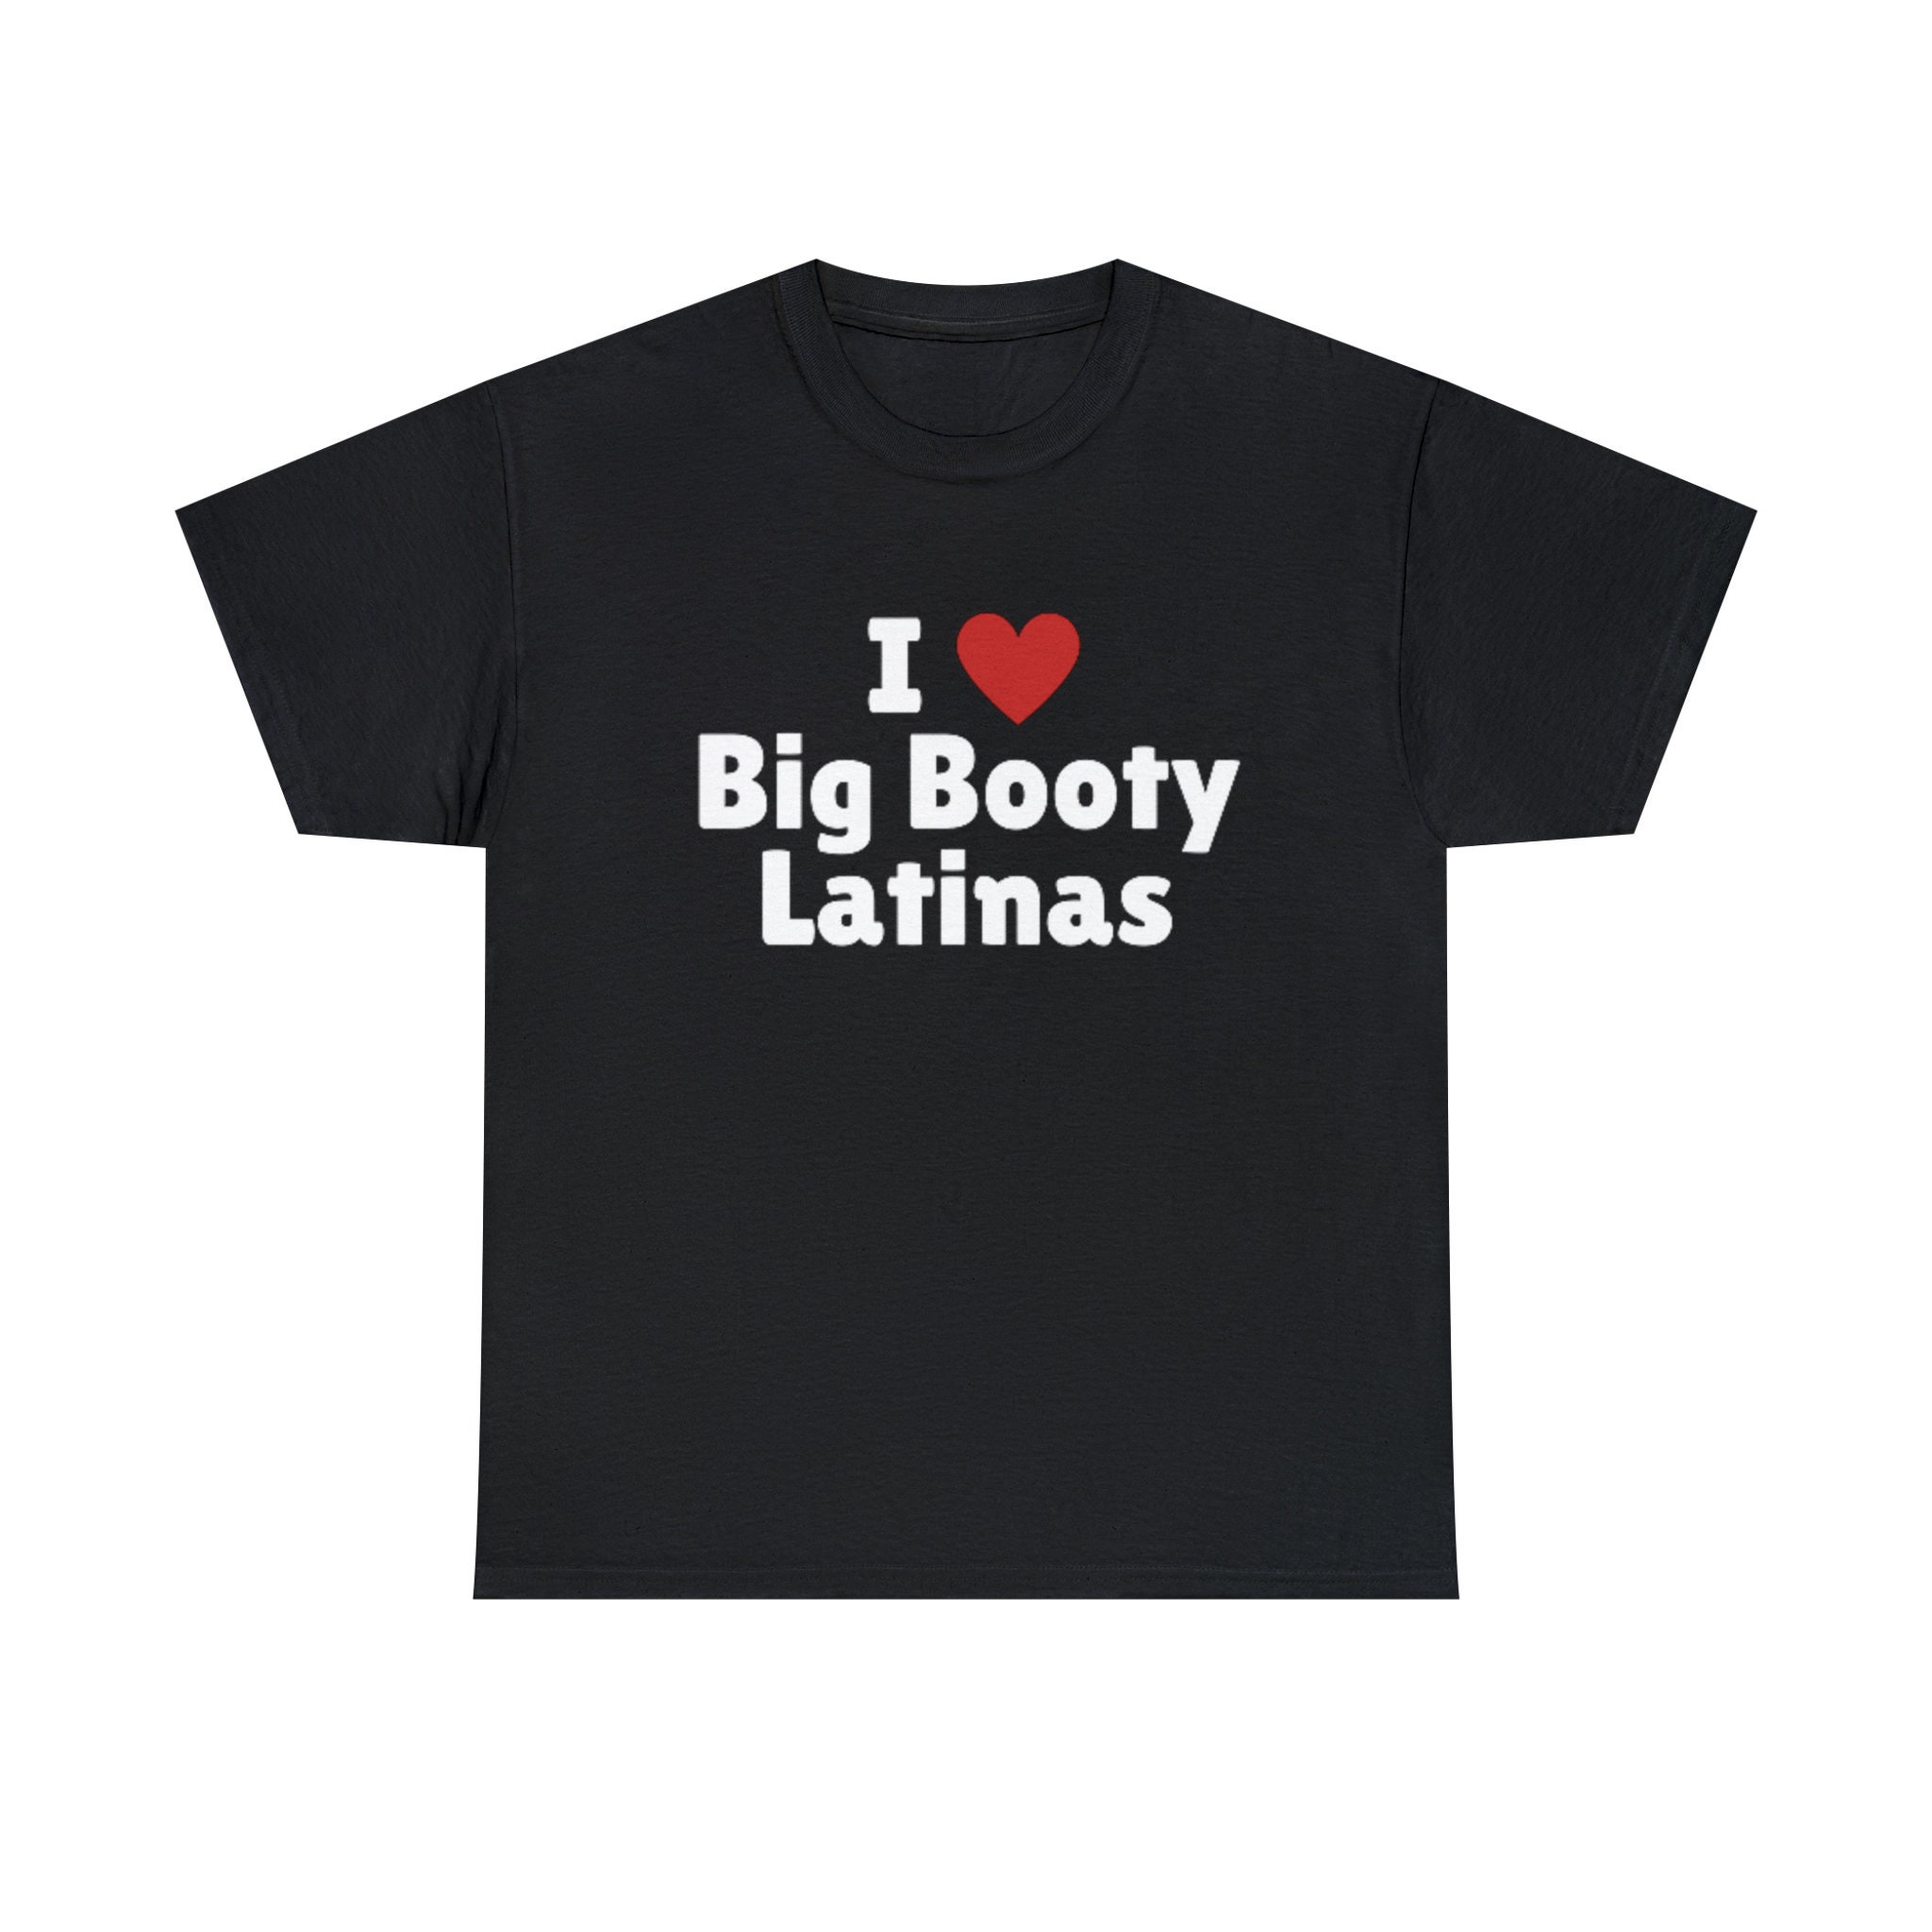 chris alves recommends Big Brown Booty Latina Ready For Action